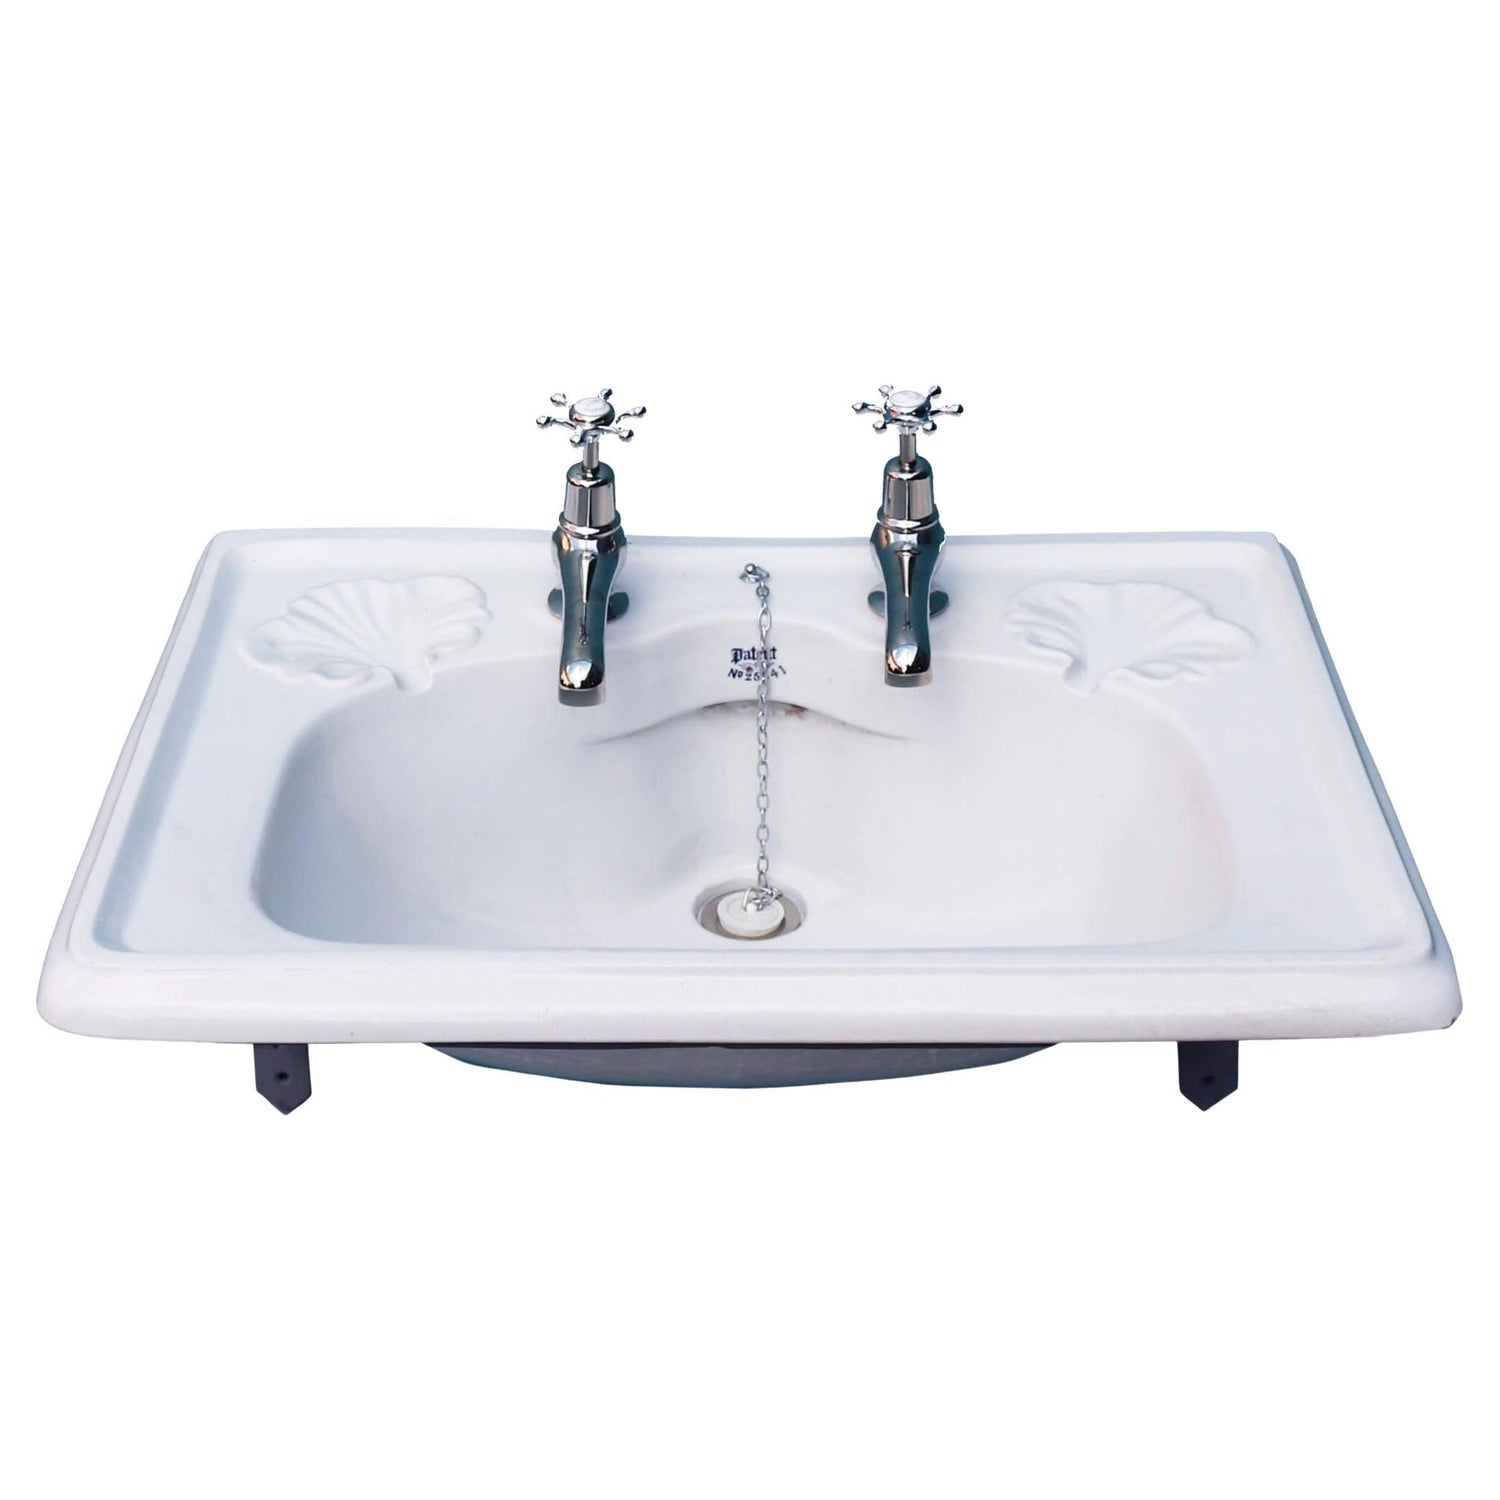 Wall Mounted Victorian Cloakroom Basin For Sale at 1stDibs